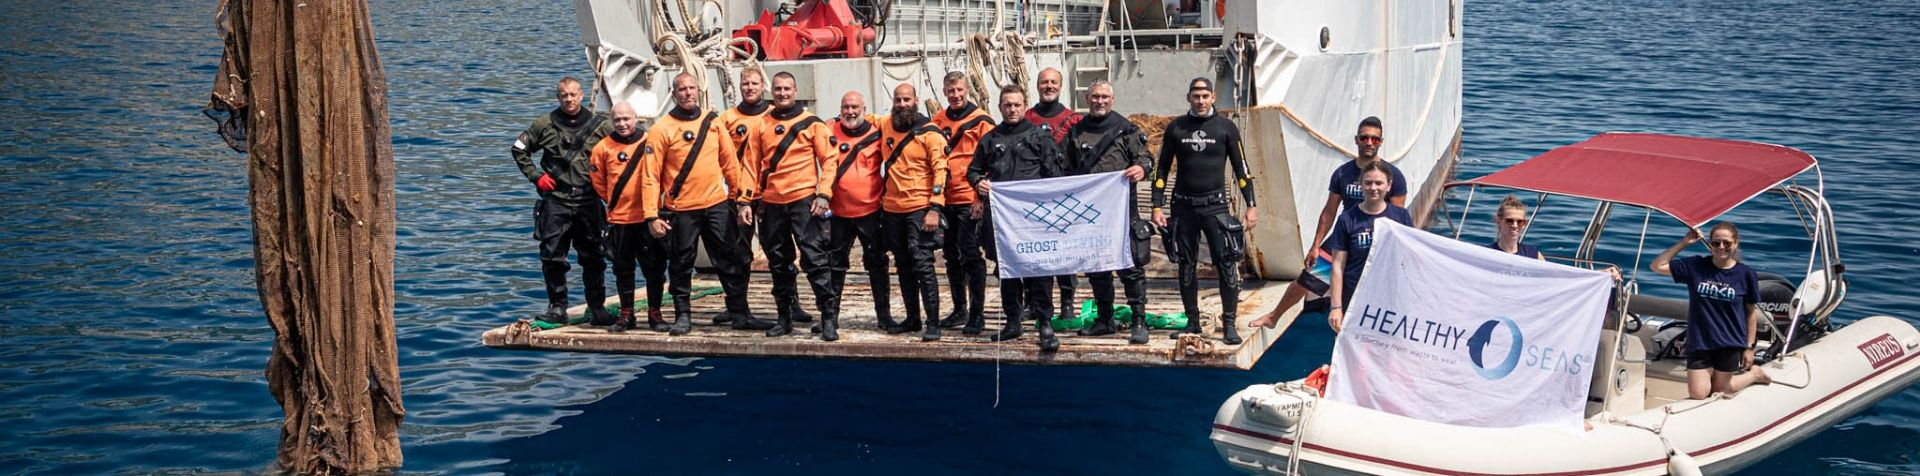 The ocean clean-up team dressed in orange standing on the back of a boat with a smaller boat next to it waving the Healthy Seas flag. 